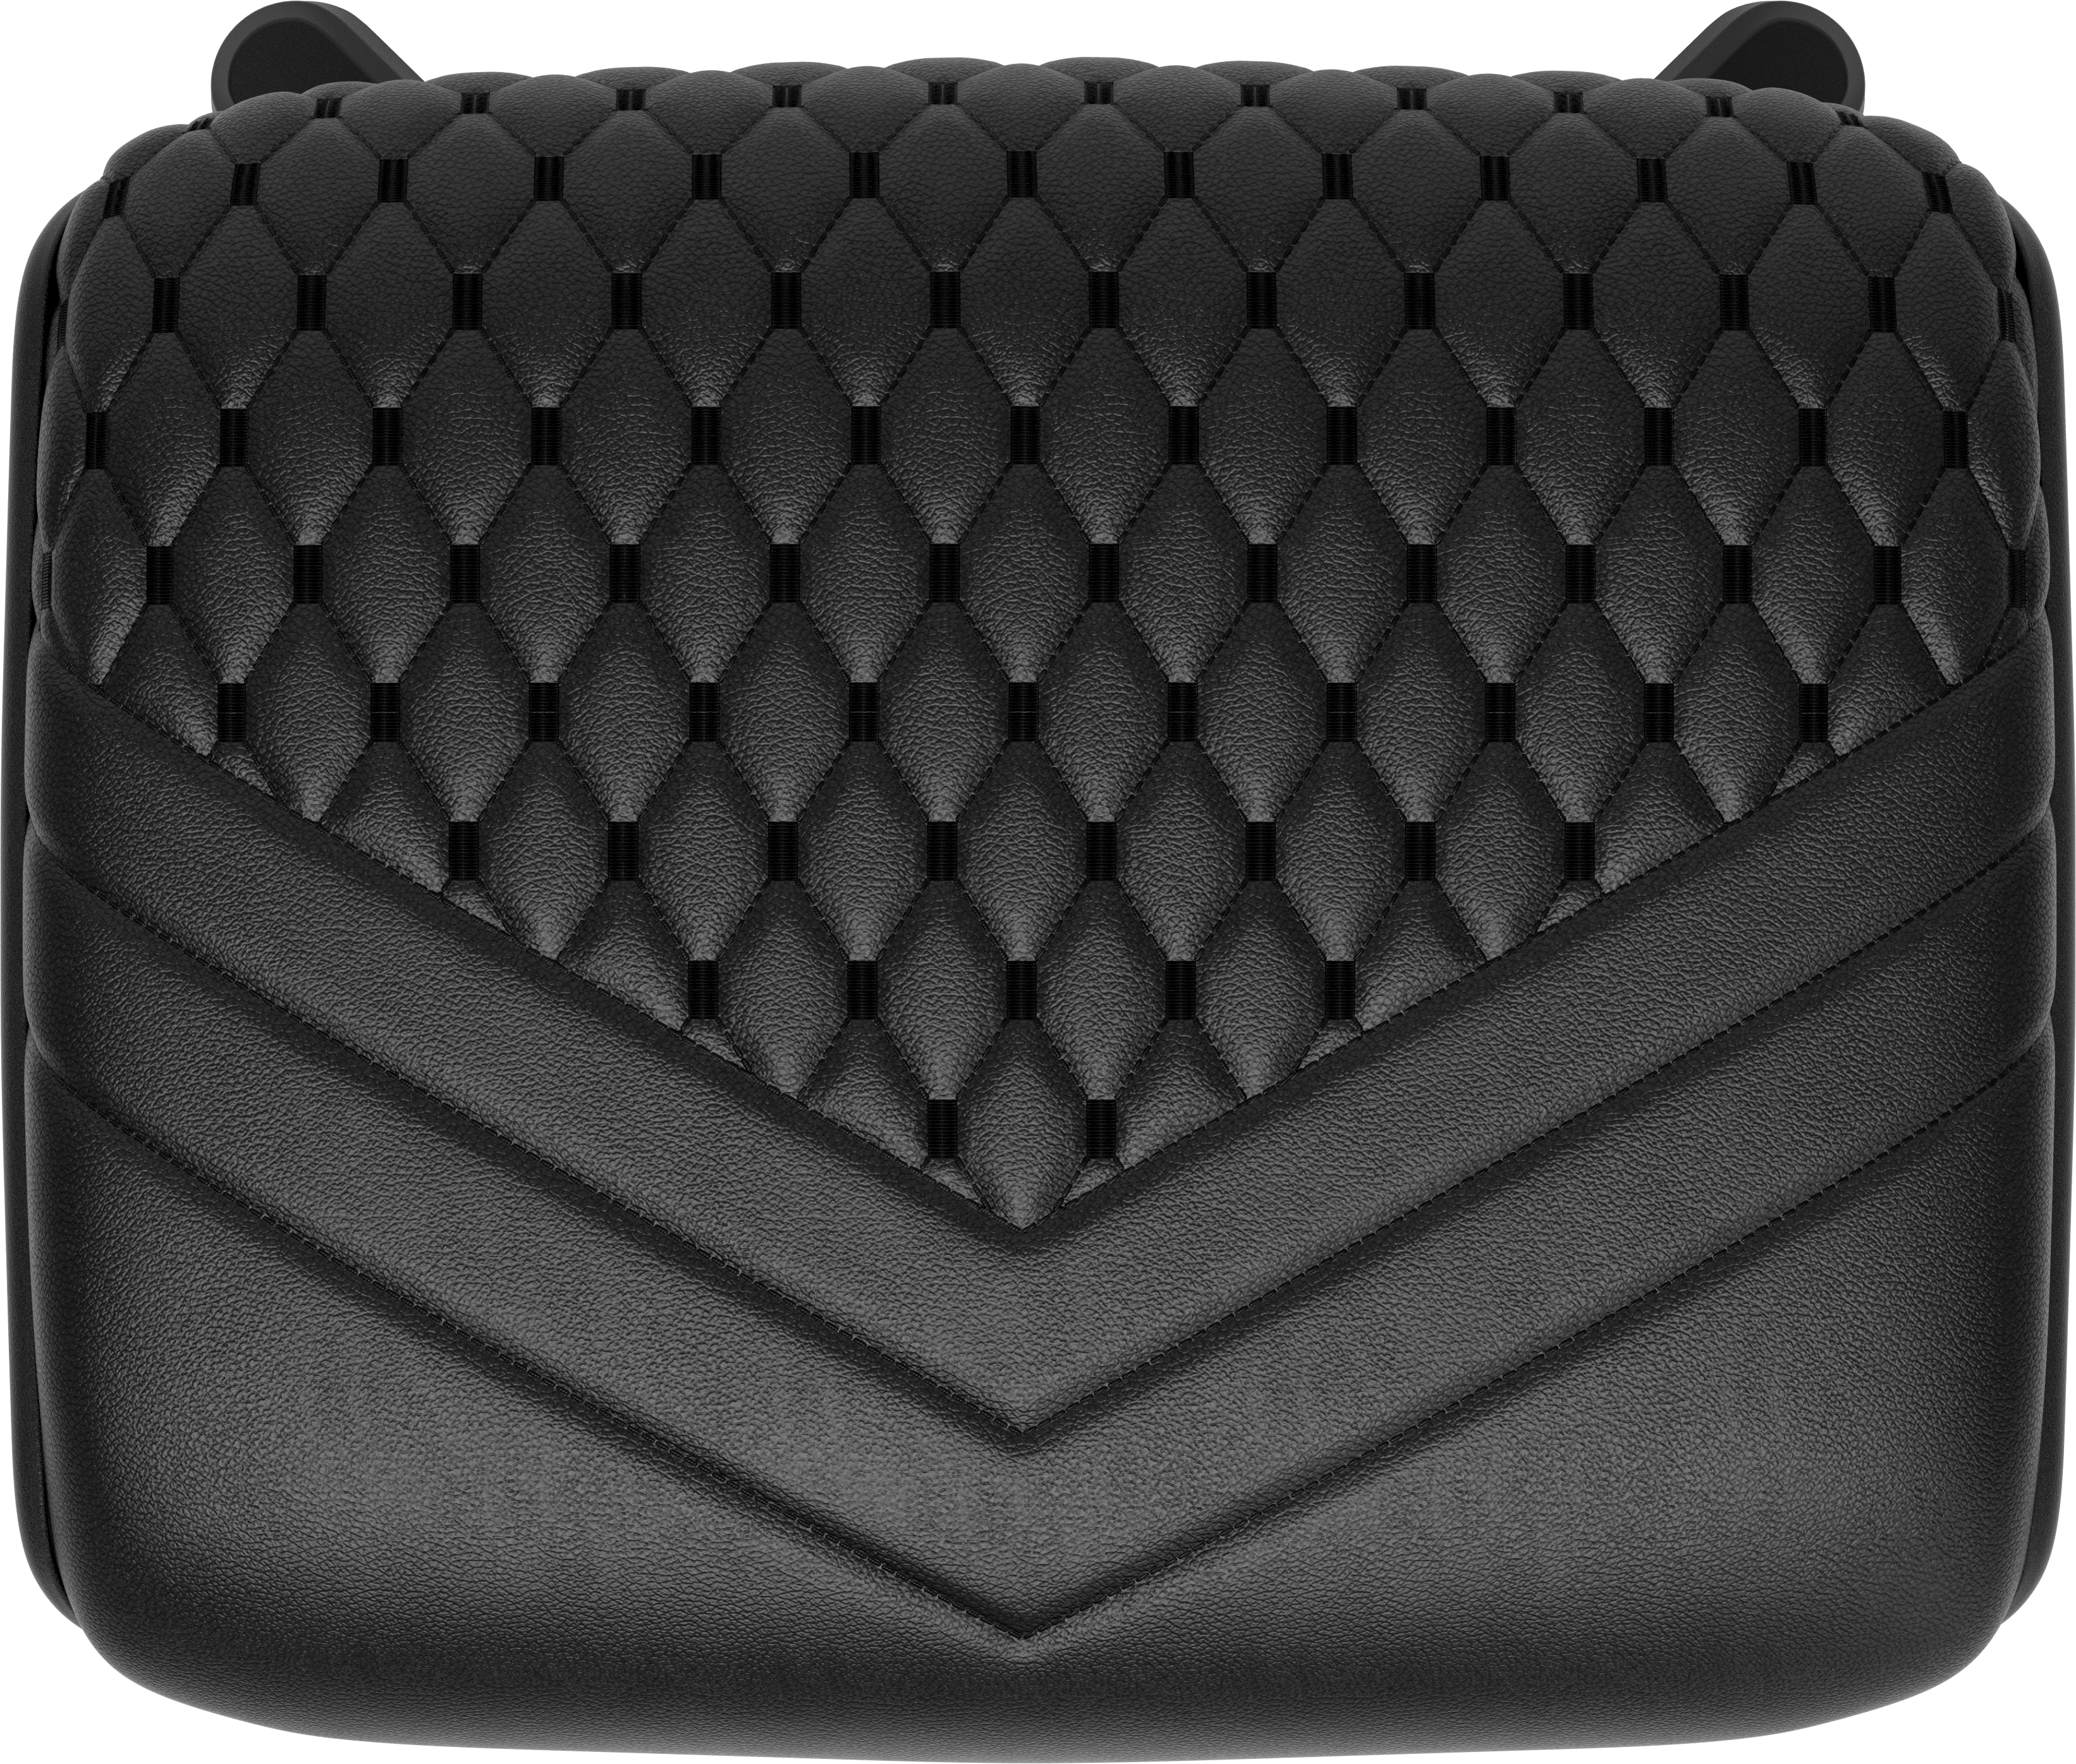 noblechairs Footrest 2 - Real Leather Black premium materials